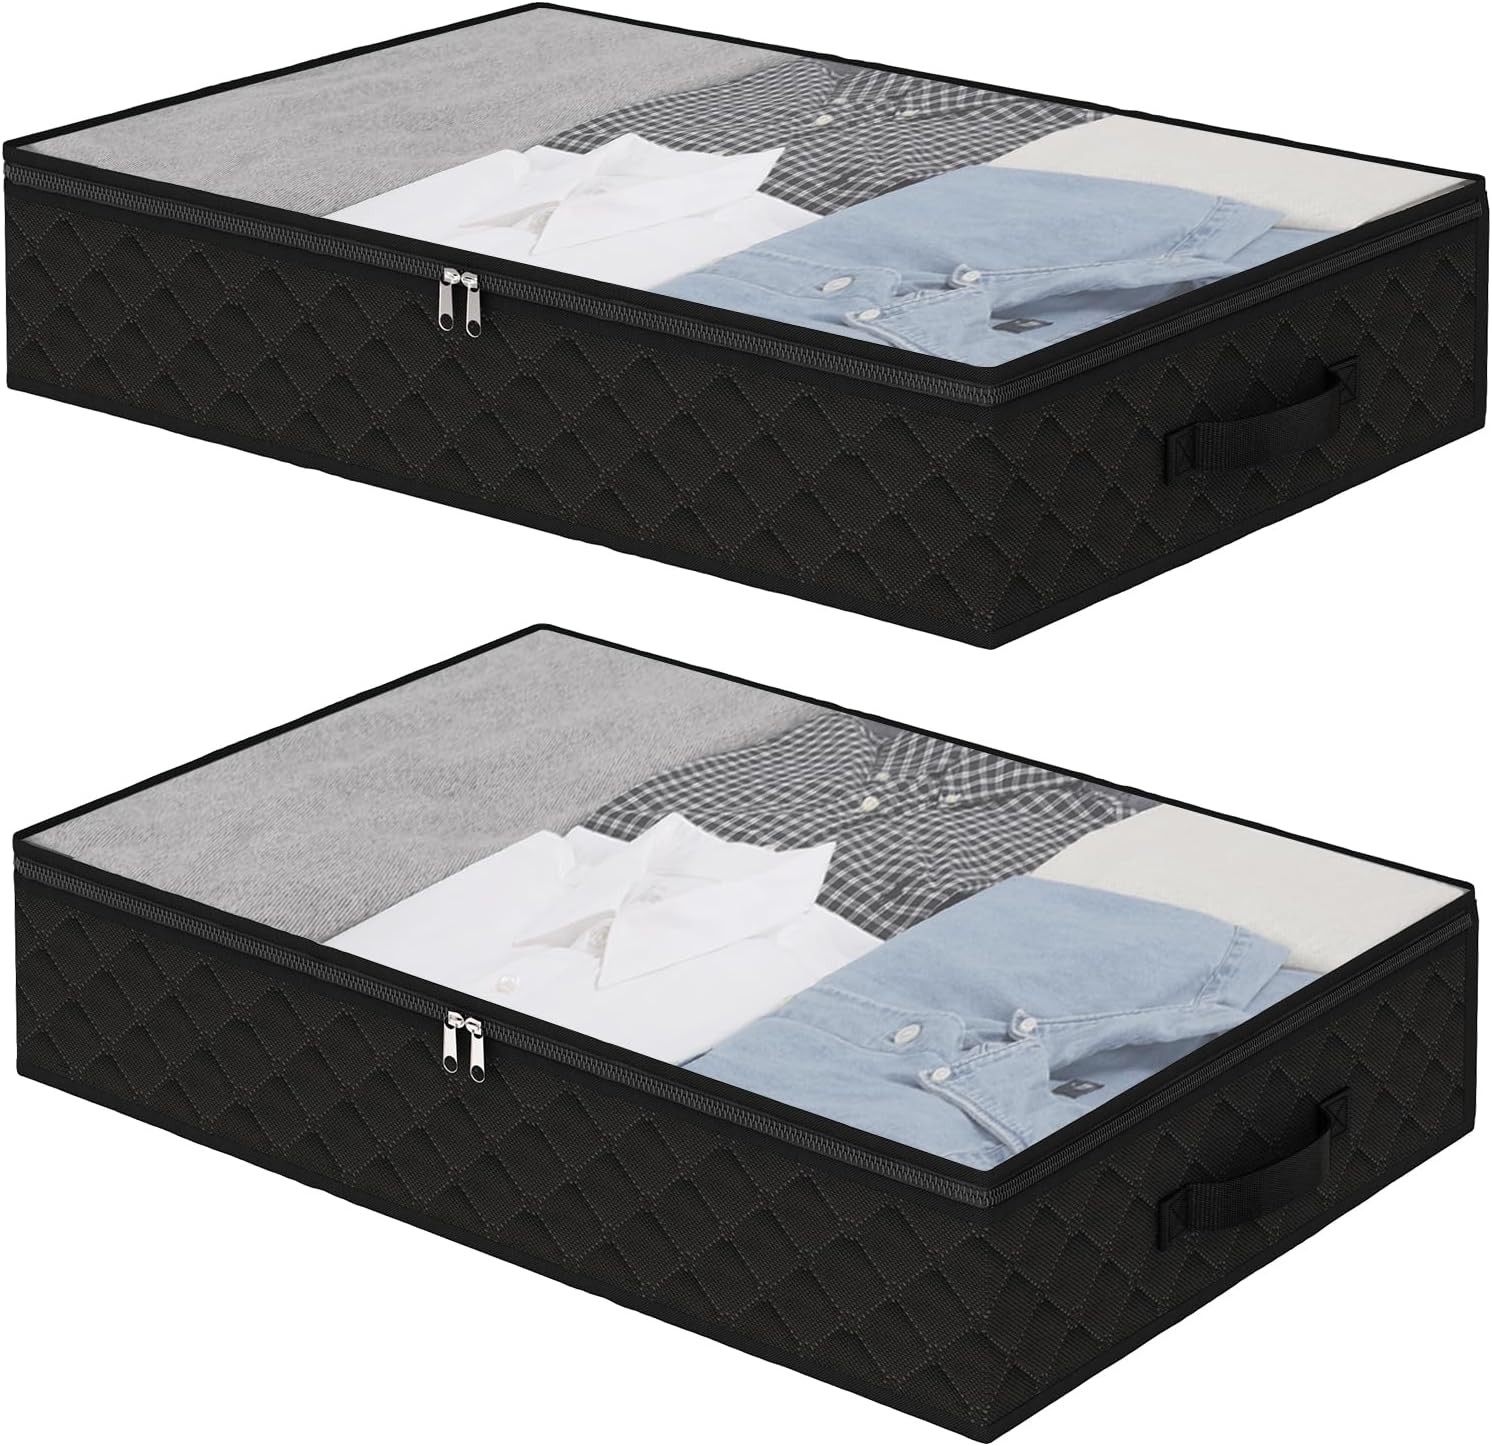 Fixwal Black Underbed Storage Bags with Clear Window and 2 Reinforced Handles Under Bed Storage Containers for Clothing, Bedding, Comforter2 Pack